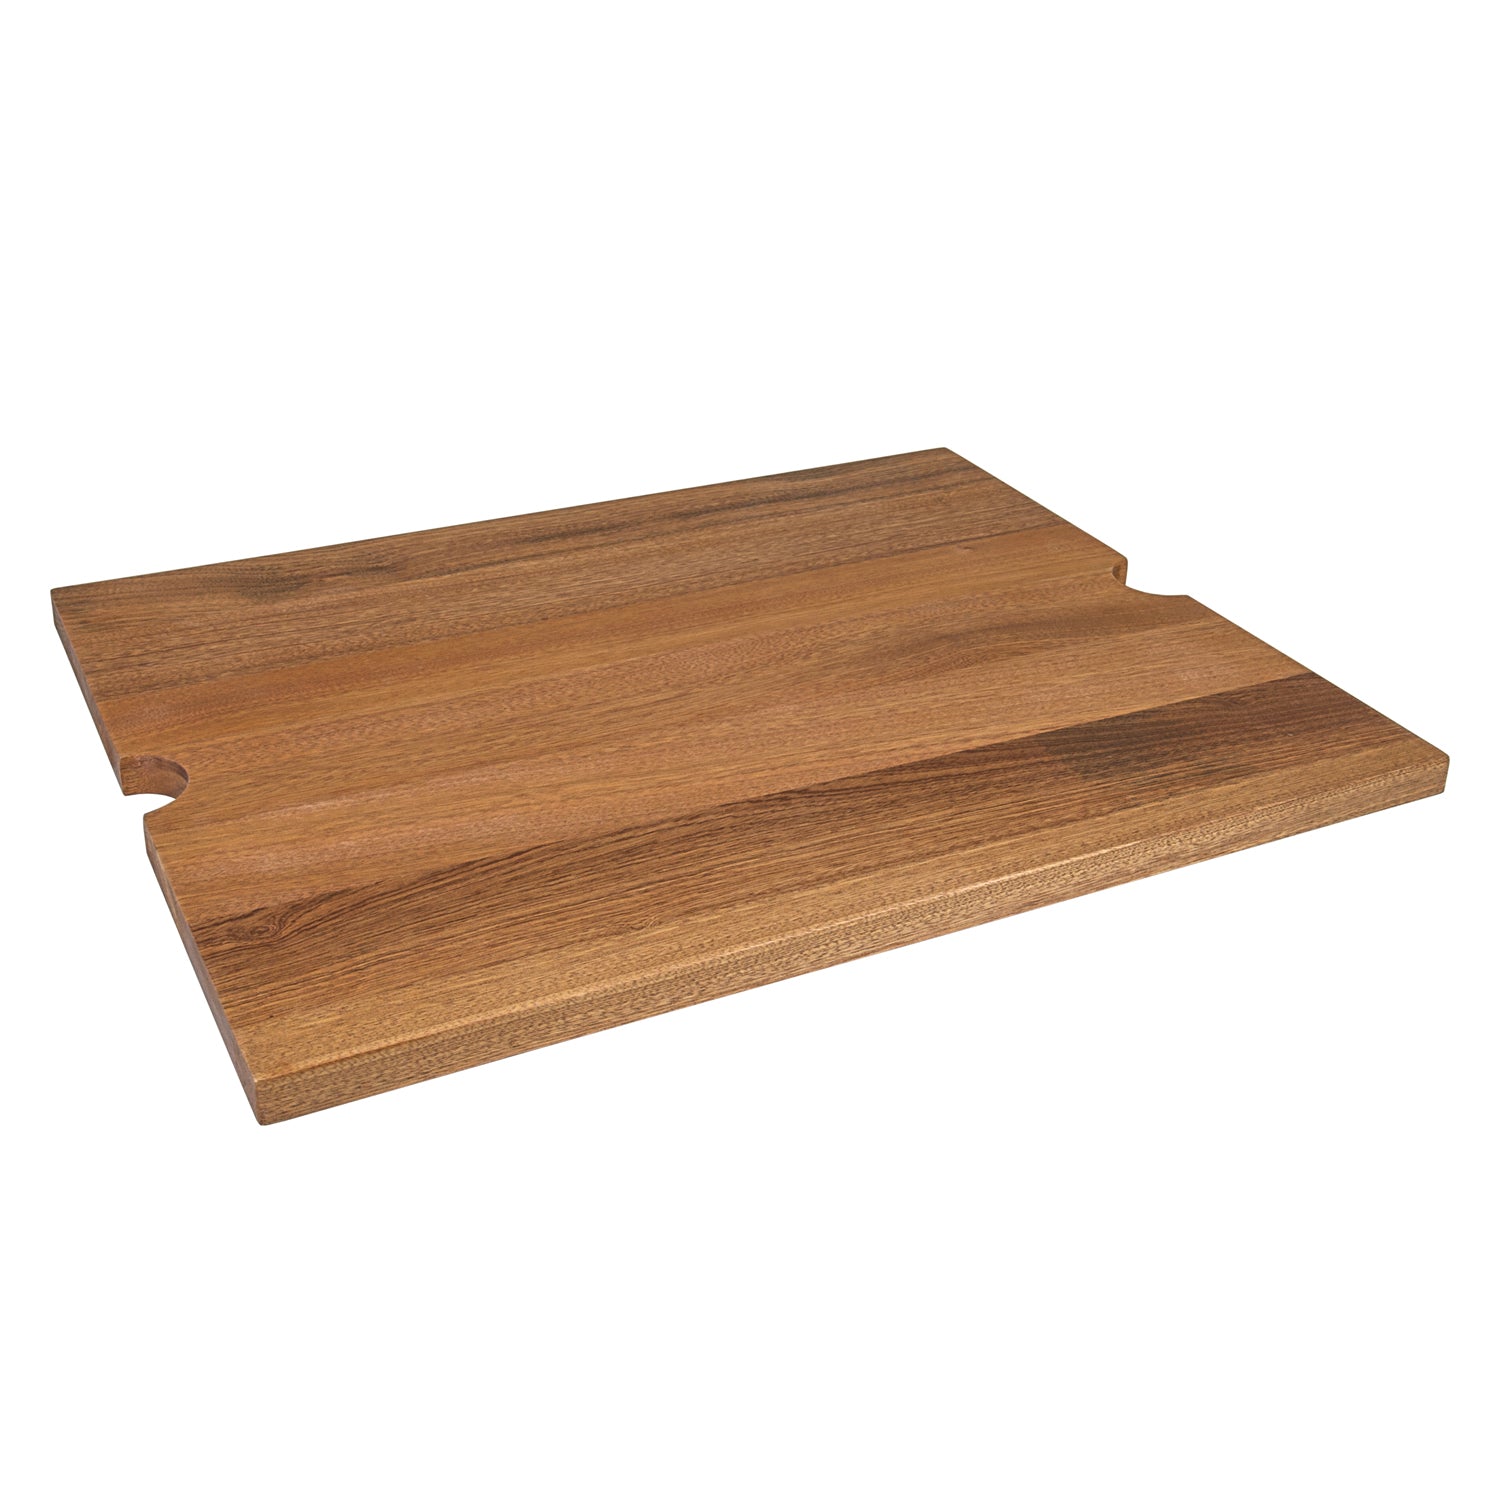 Ruvati 19 x 16 inch Solid Wood Replacement Cutting Board Sink Cover for RVH8221 workstation sink – RVA1221